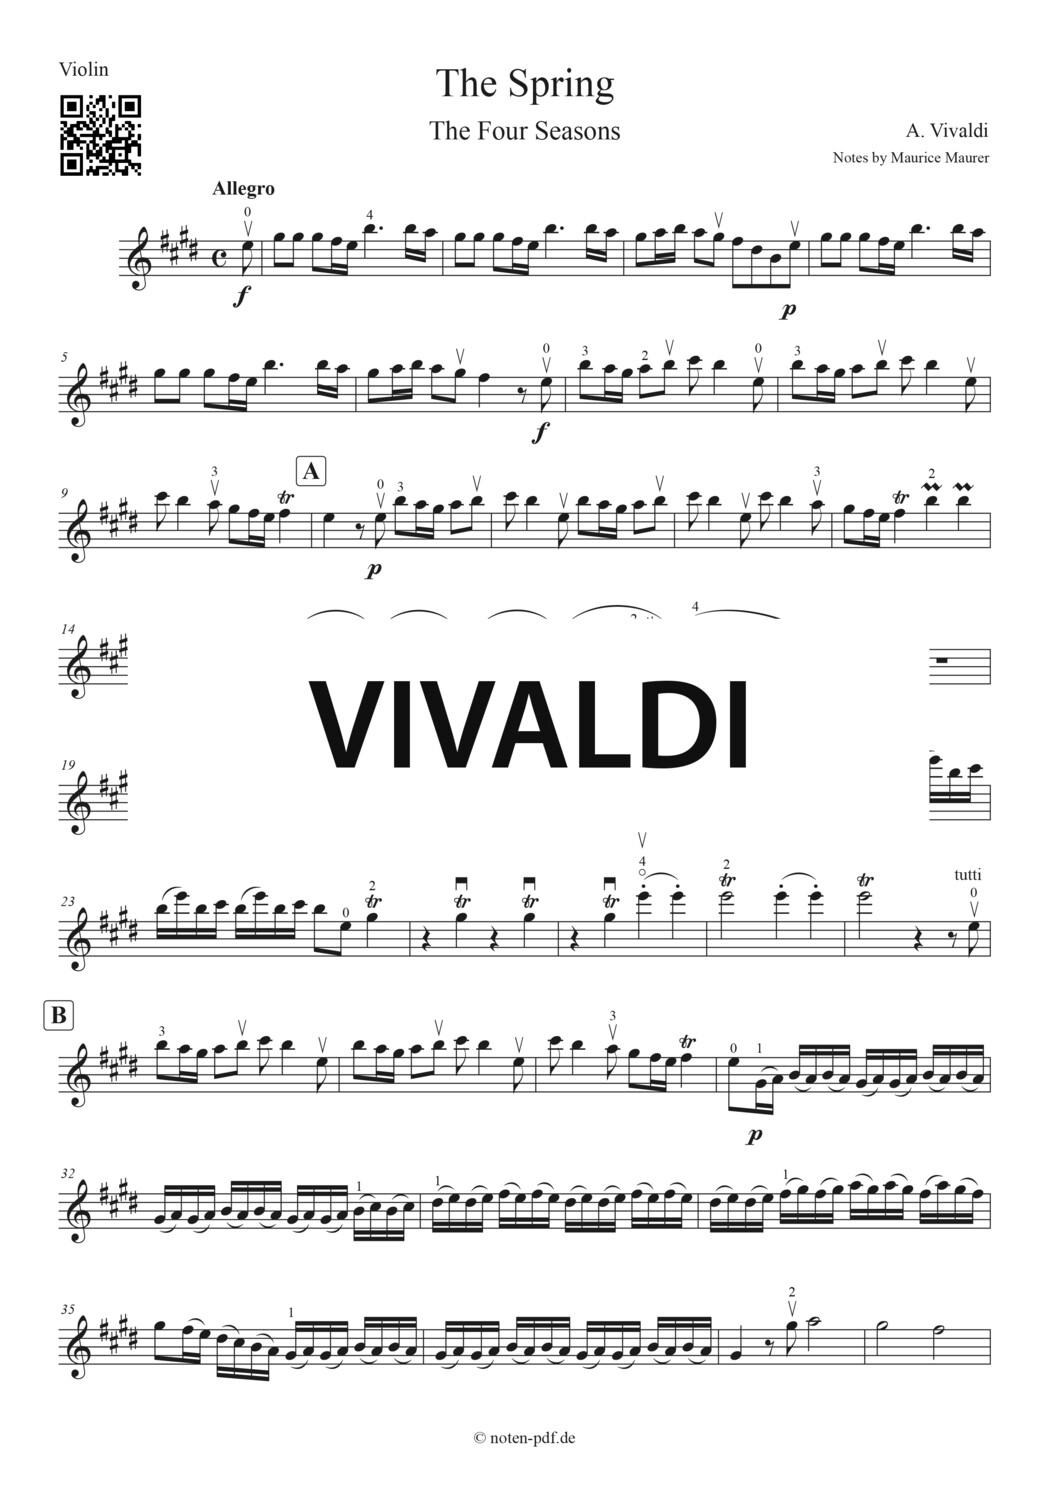 Vivaldi: The Spring from "The Four Seasons" - All Movements